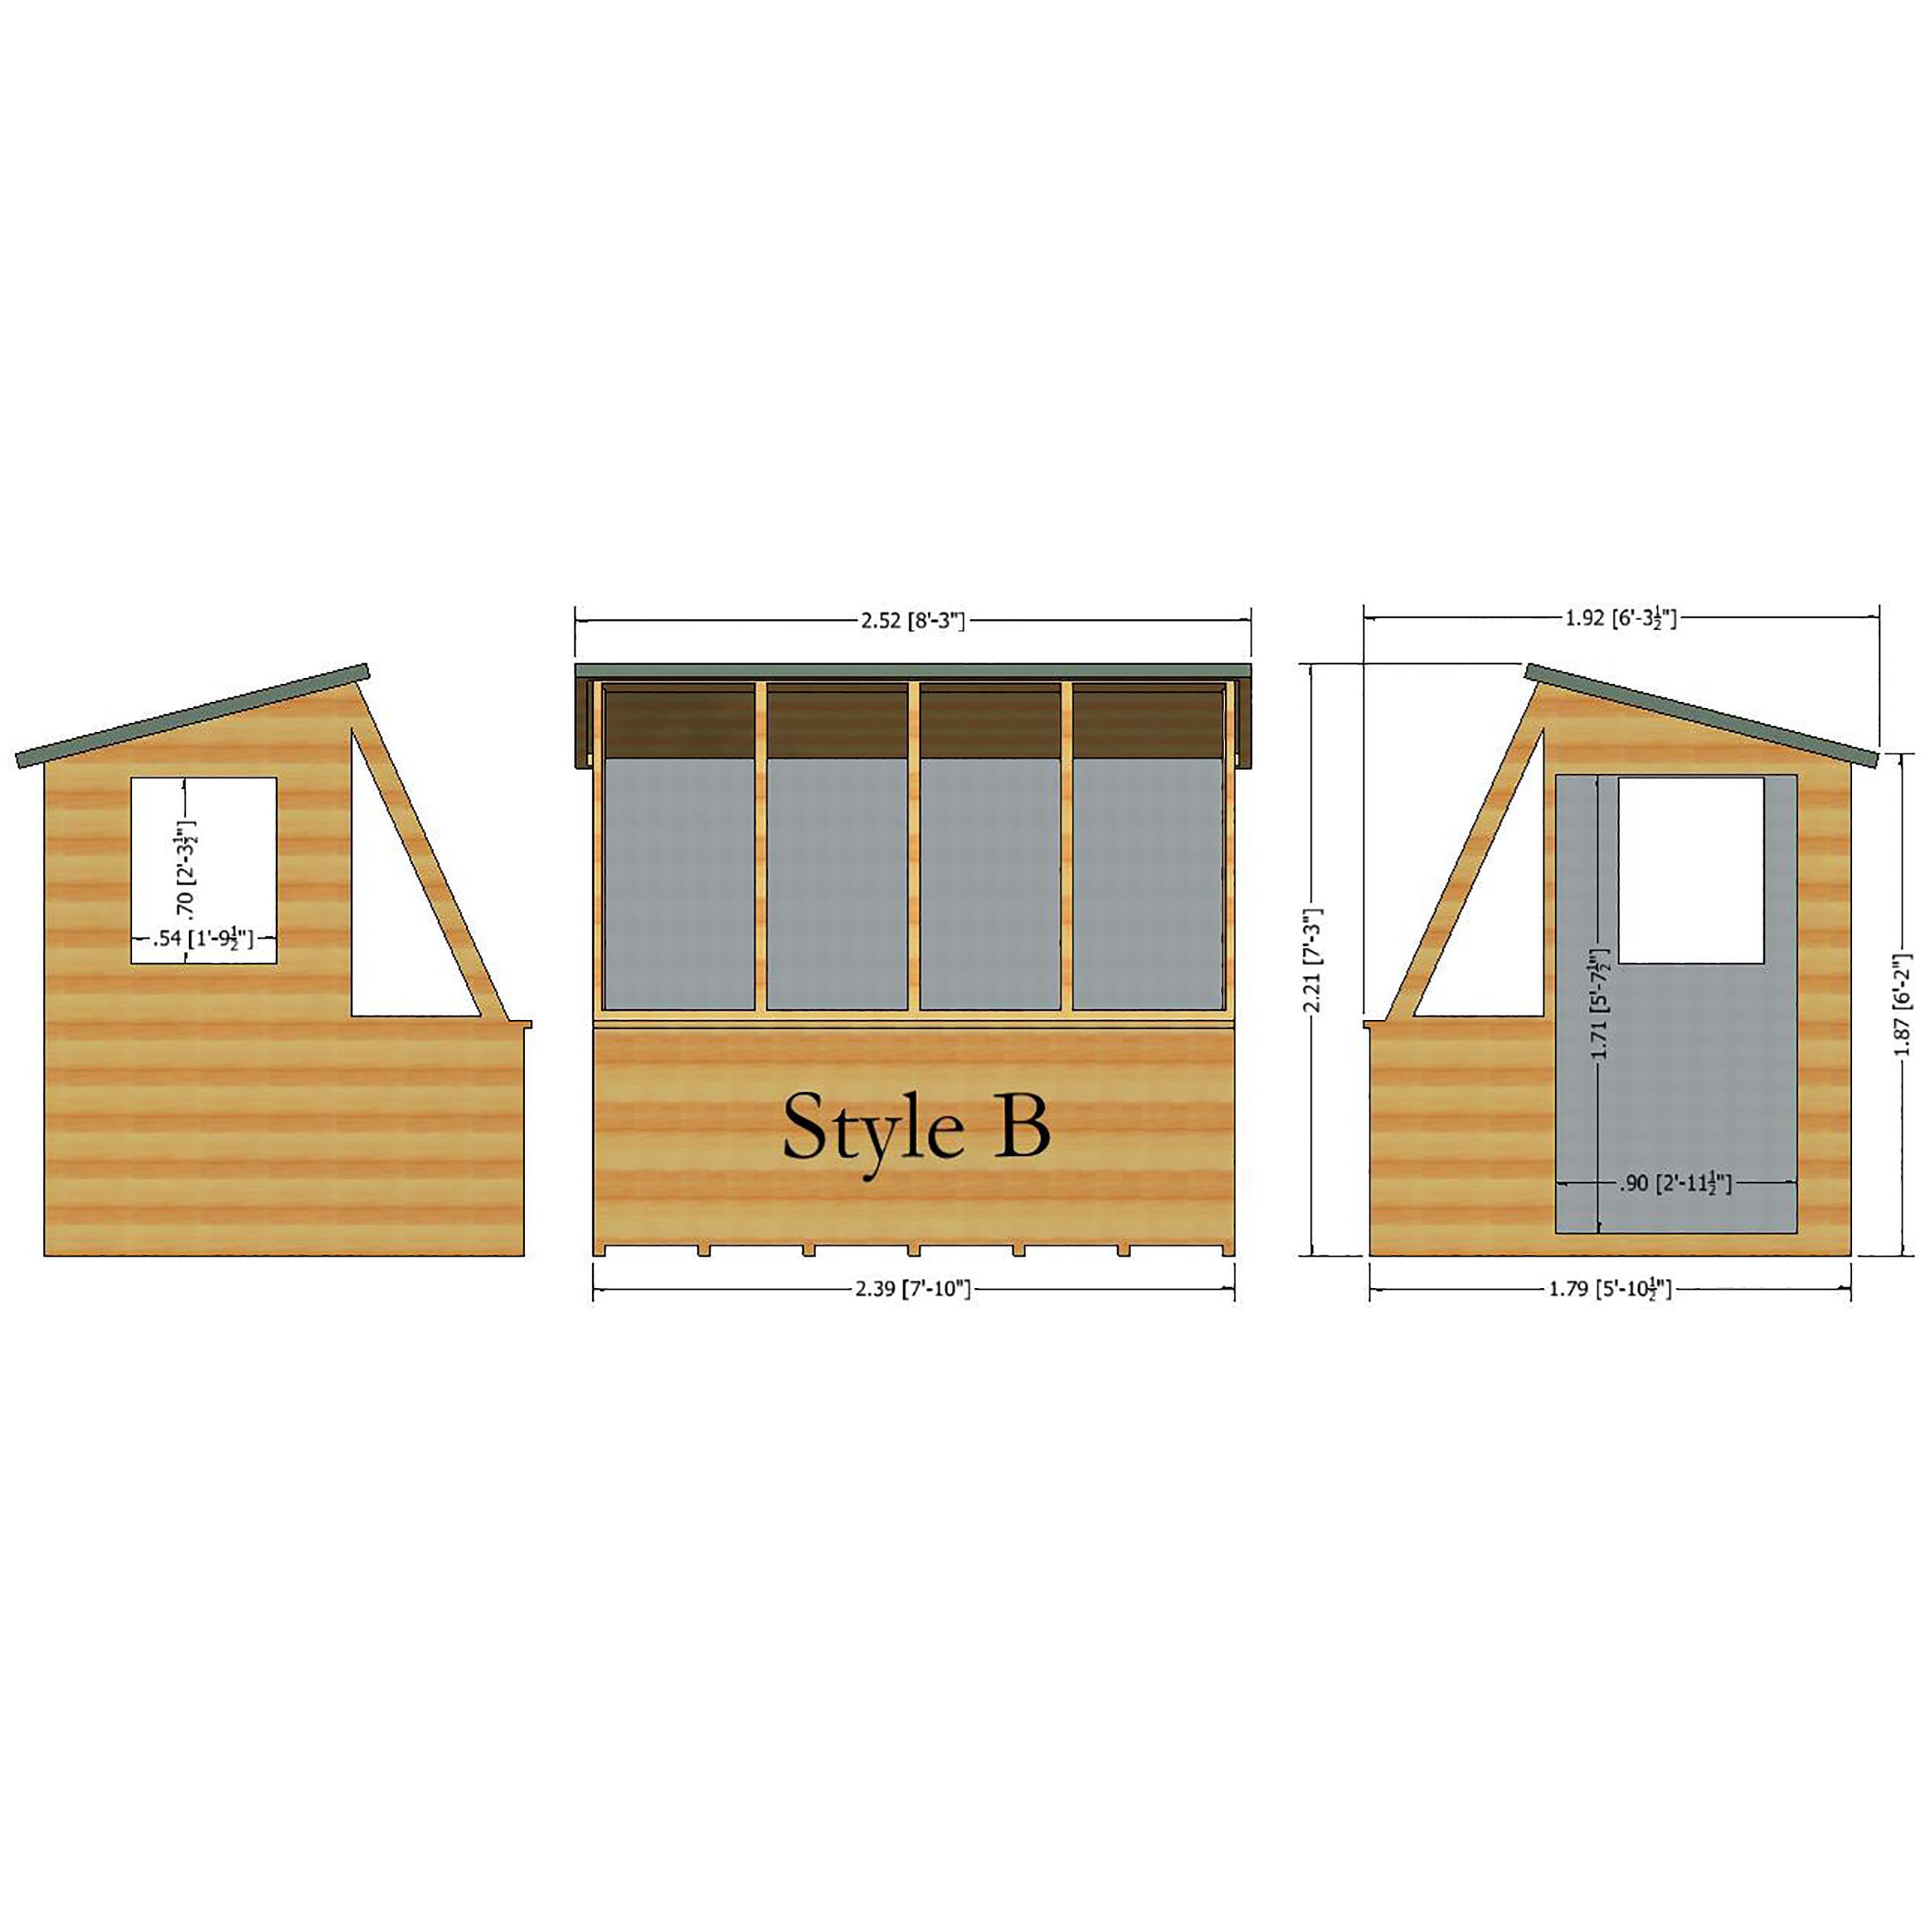 Shire Iceni 8x6 ft Pent Wooden Shed with floor & 5 windows